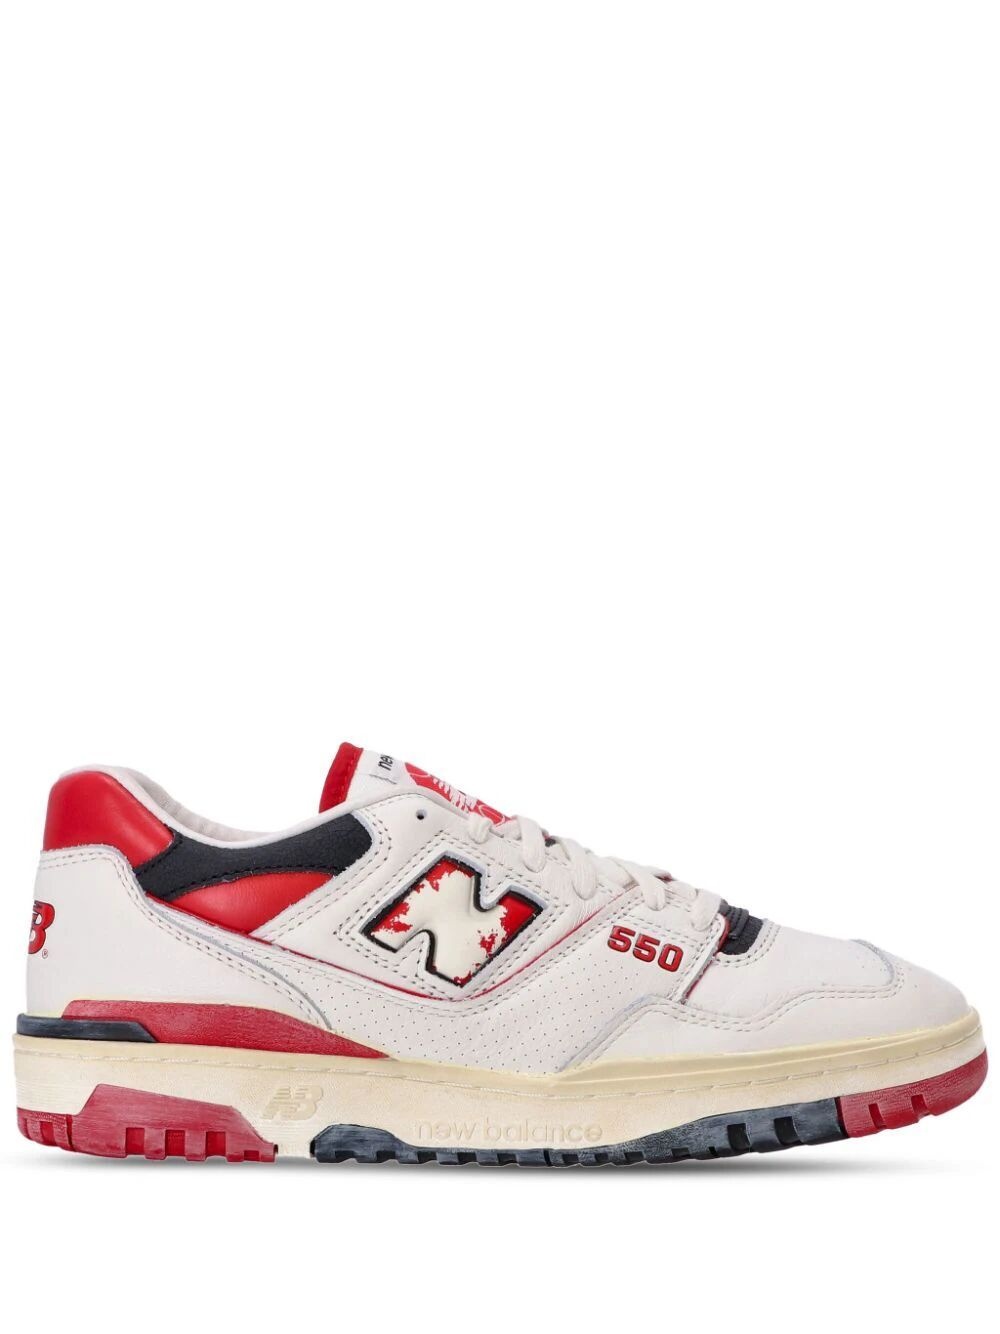 NEW BALANCE 550 SNEAKERS - 1